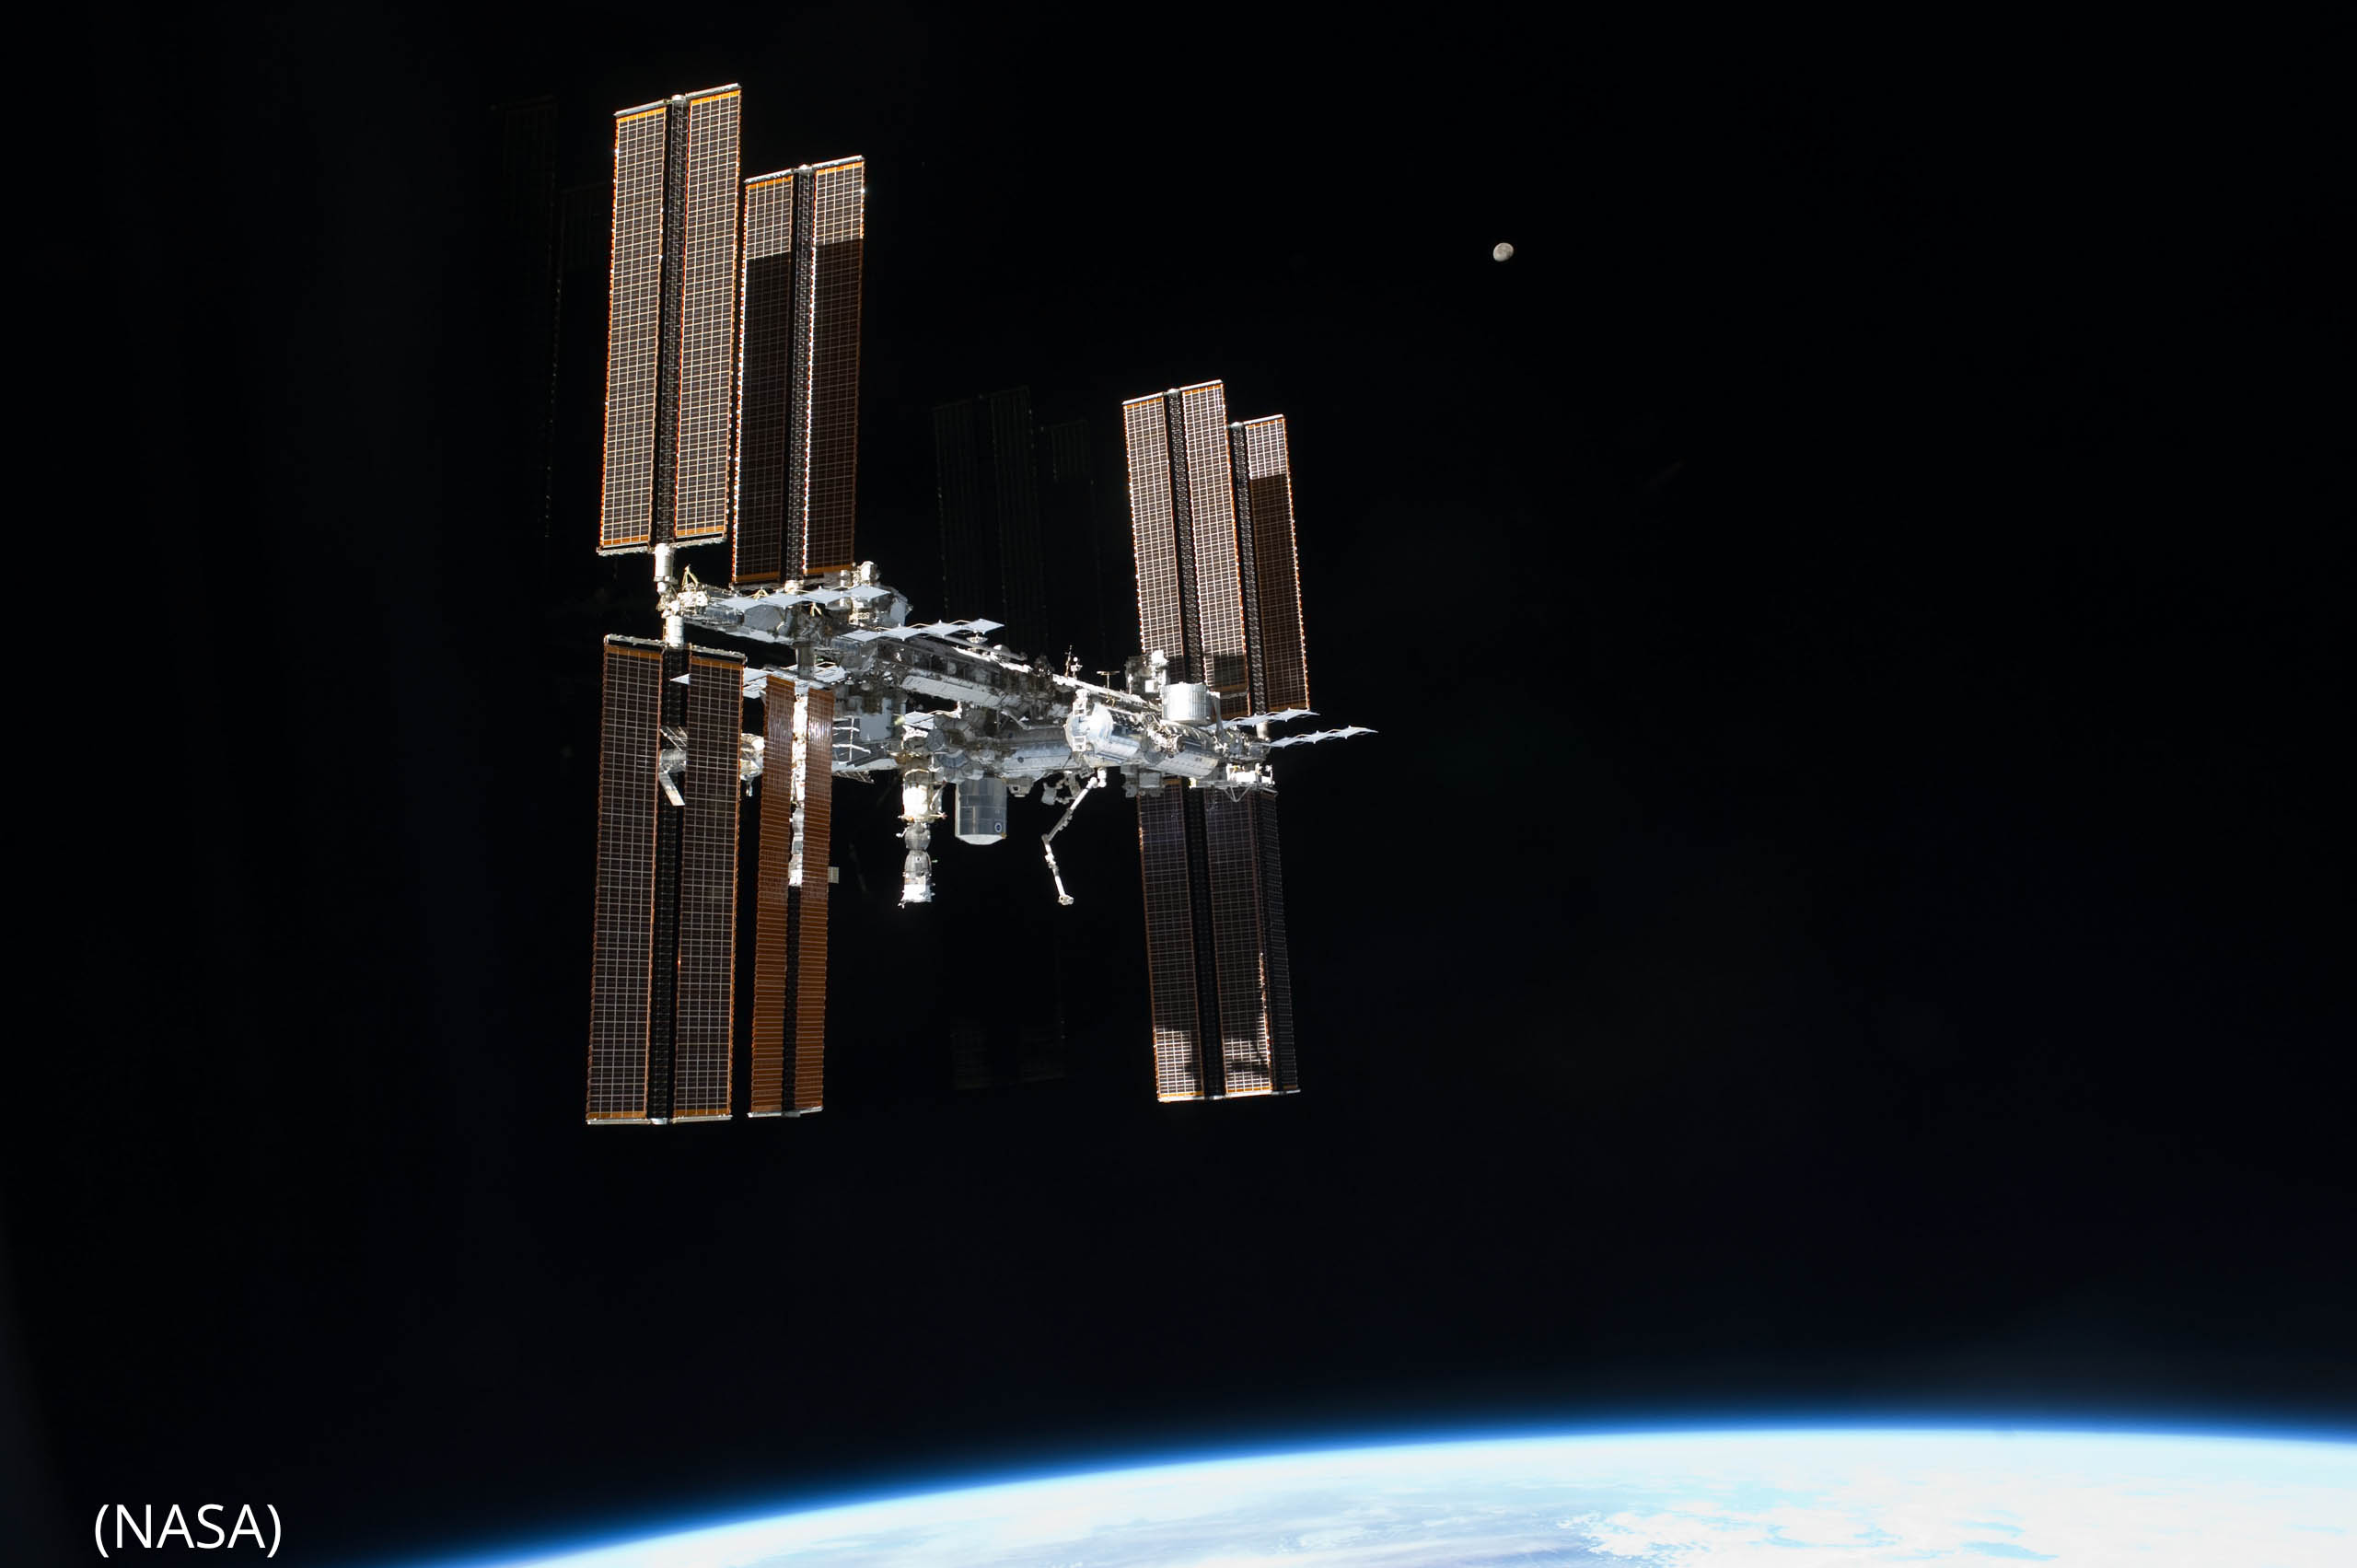 International Space Station, with Earth below (NASA)